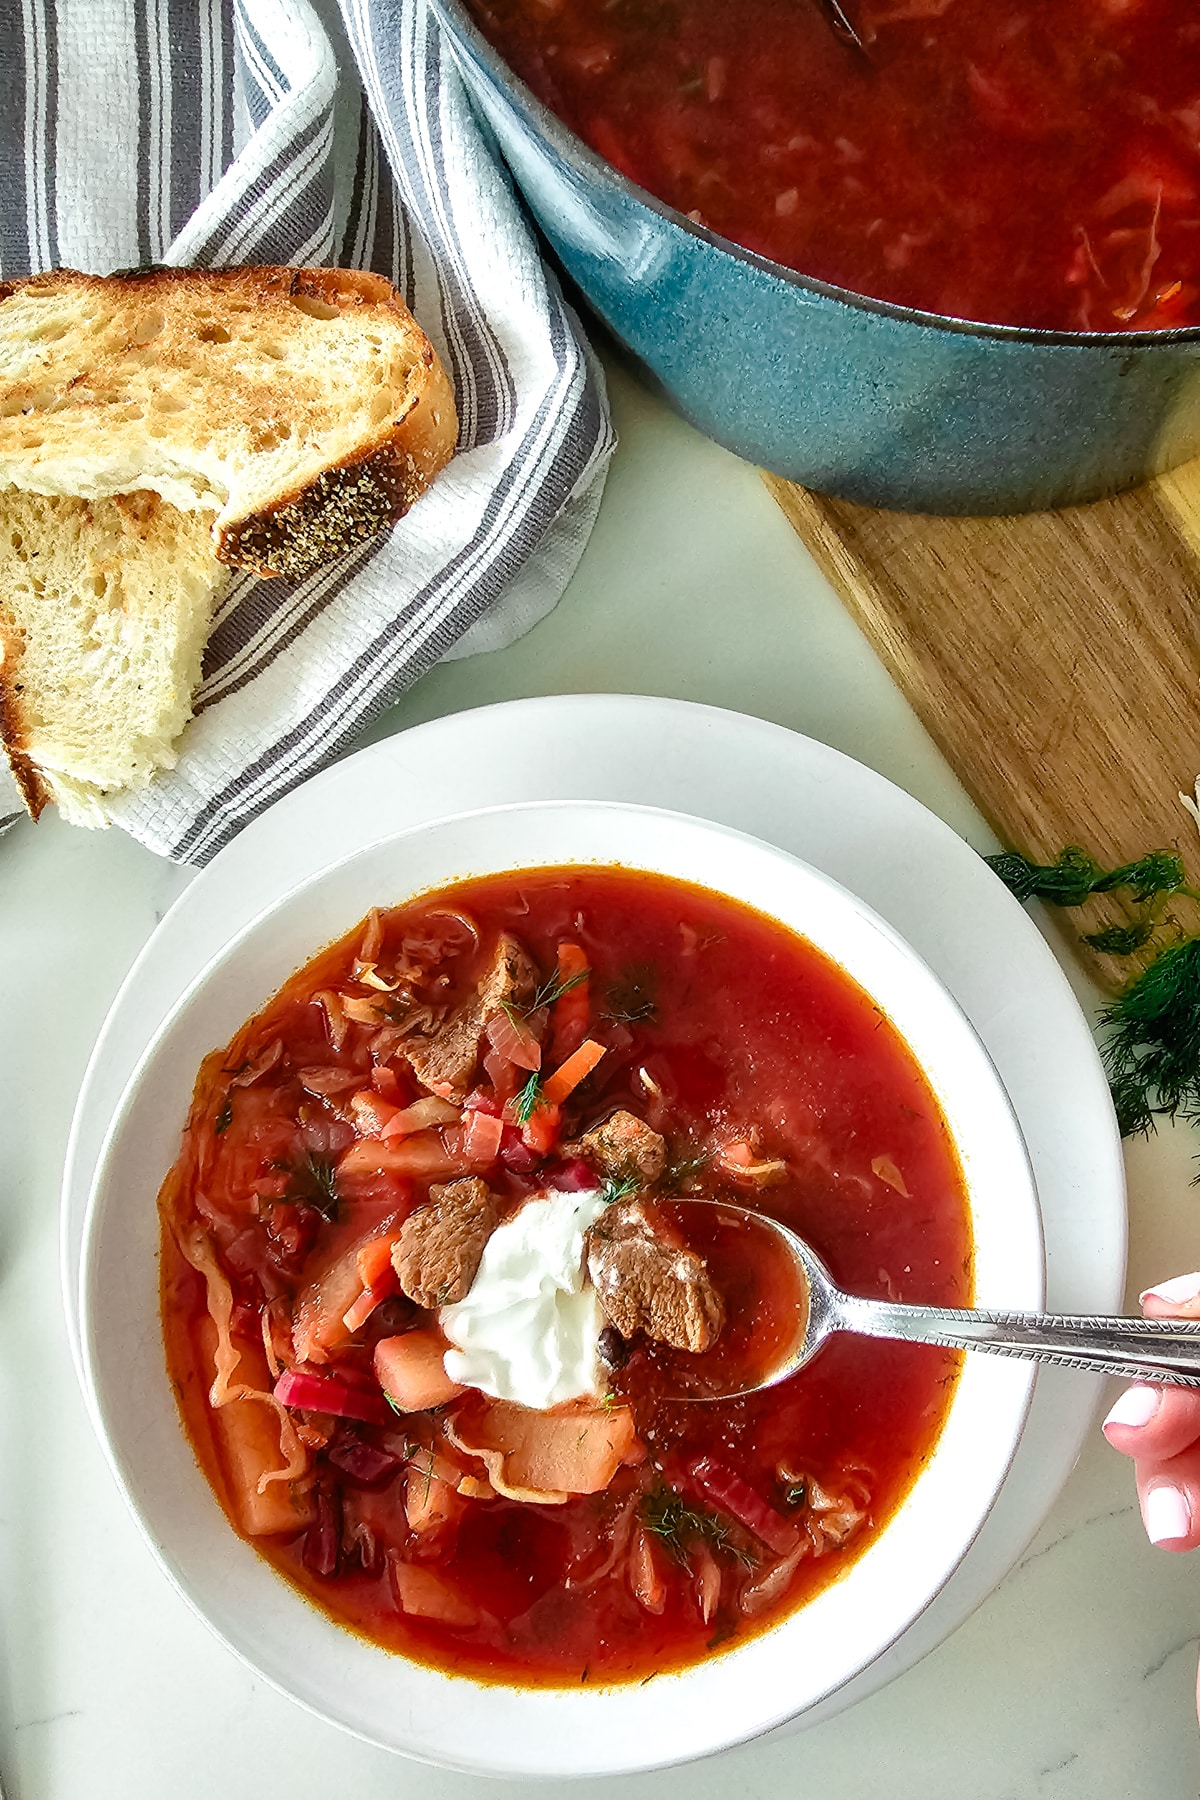 borscht in a white bowl on a white plate with bread to the left of it.